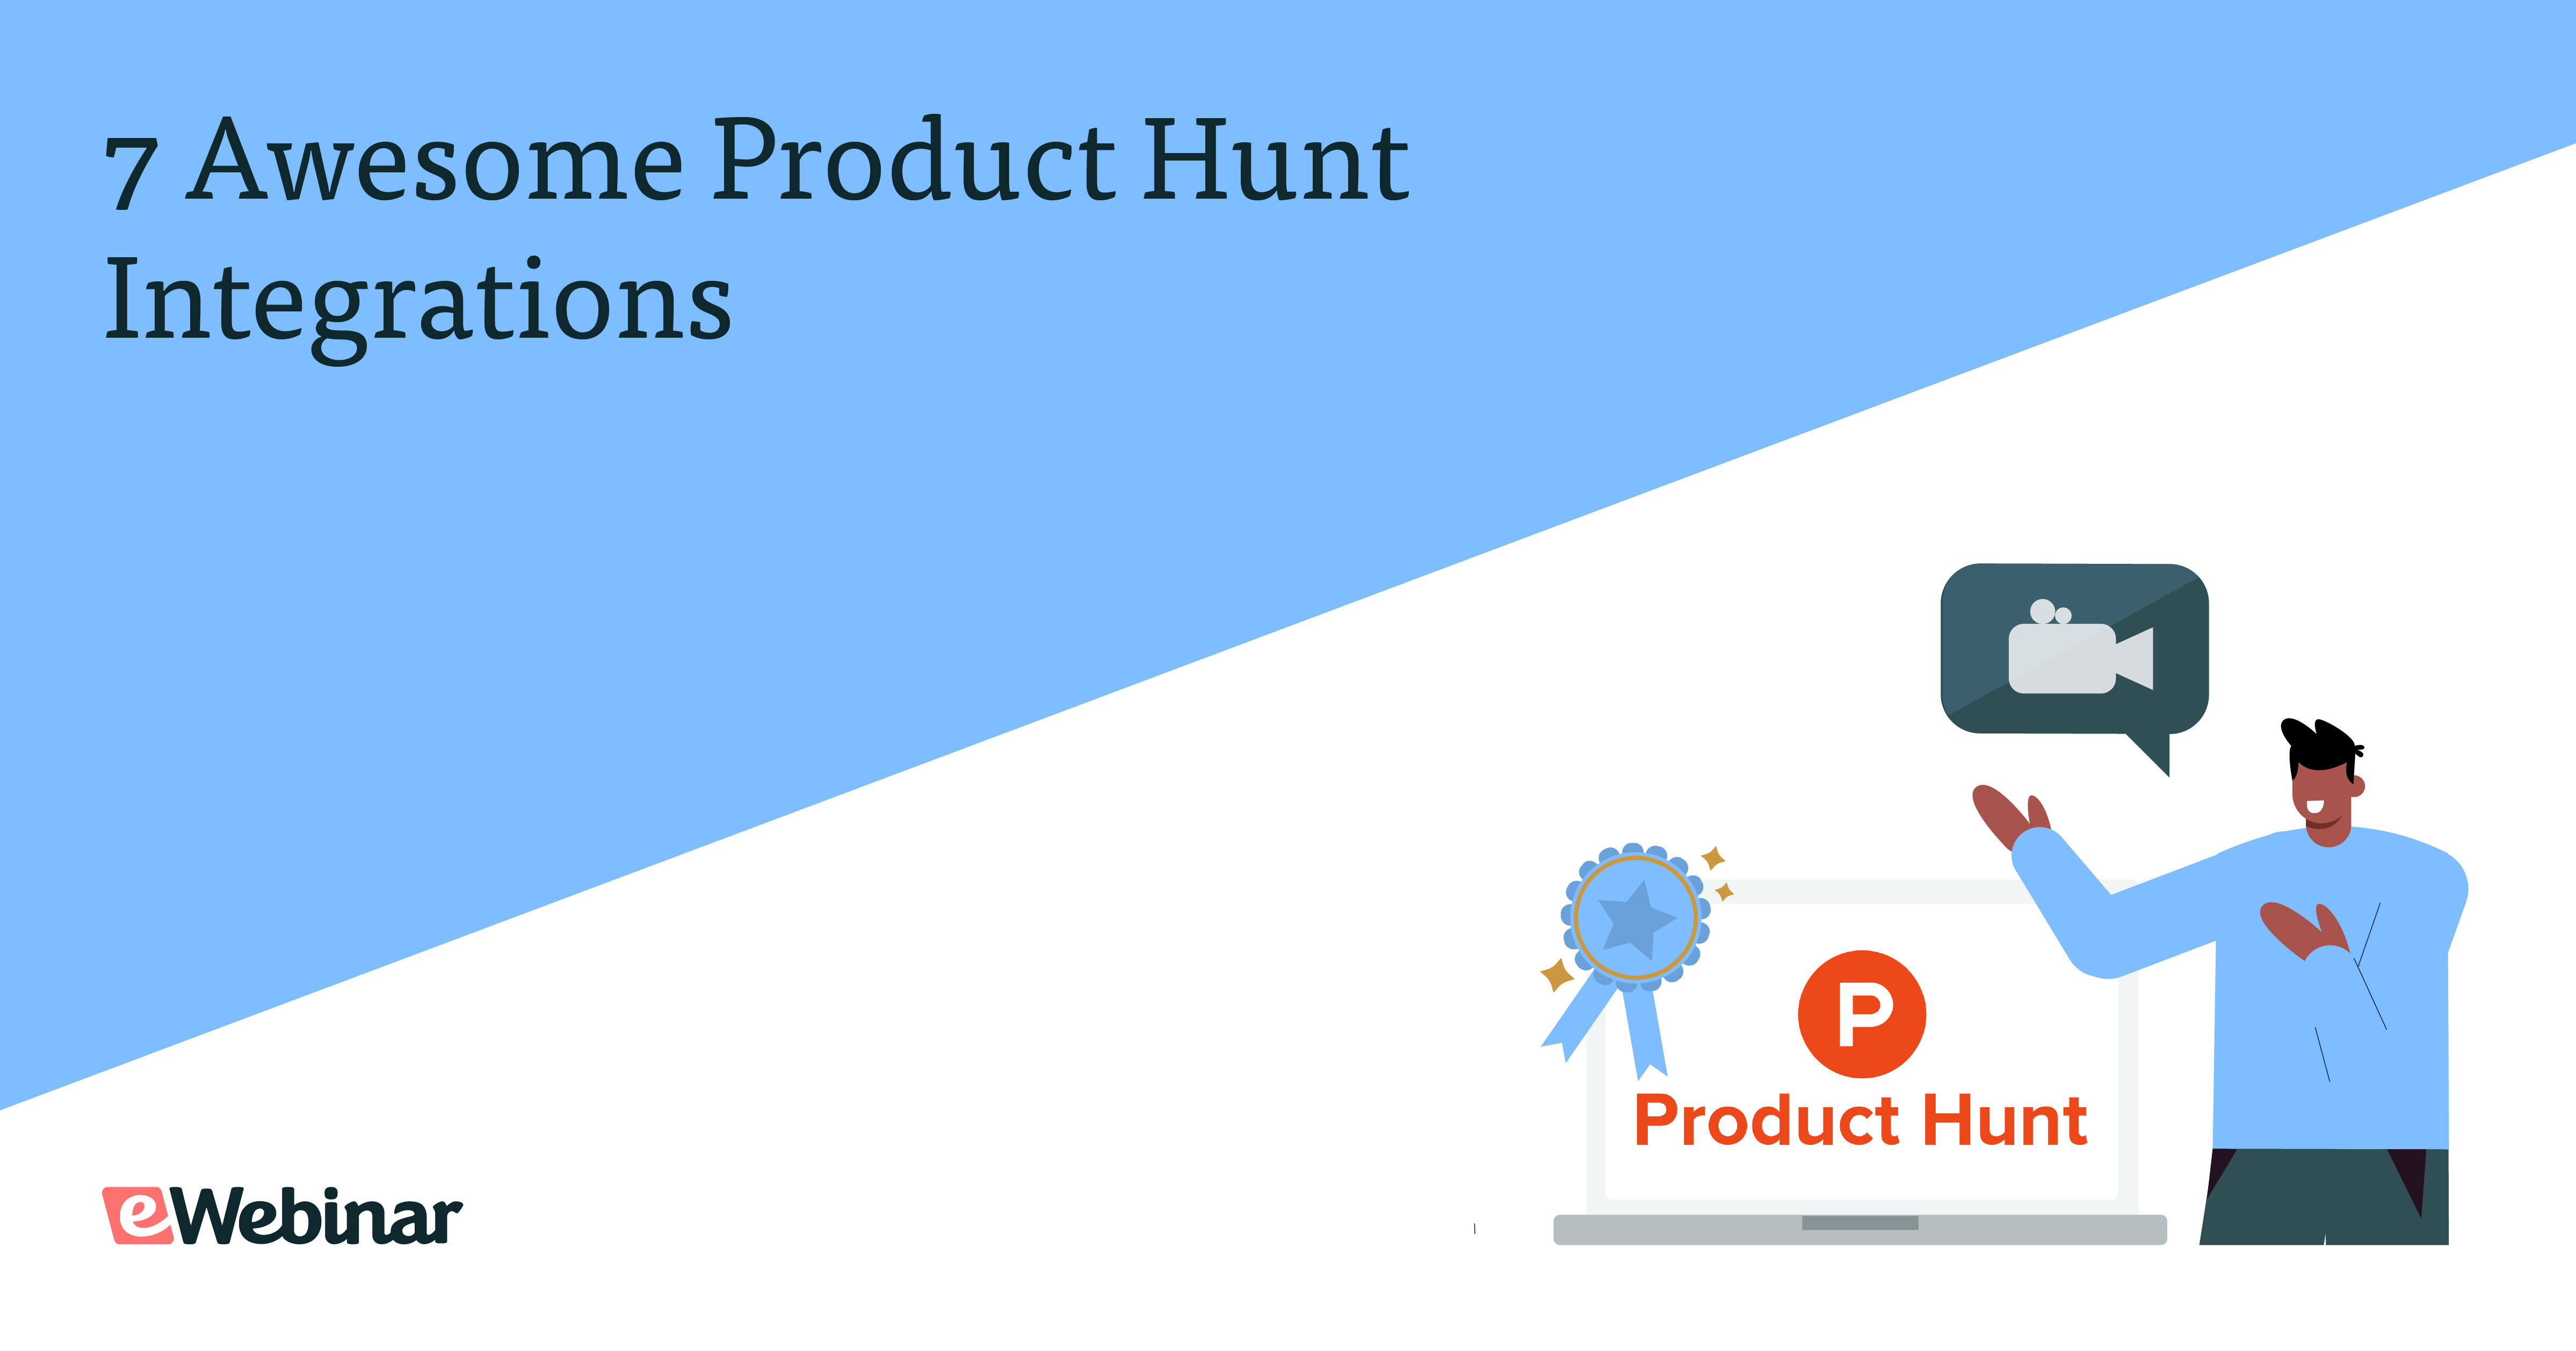 7 Awesome Product Hunt Integrations